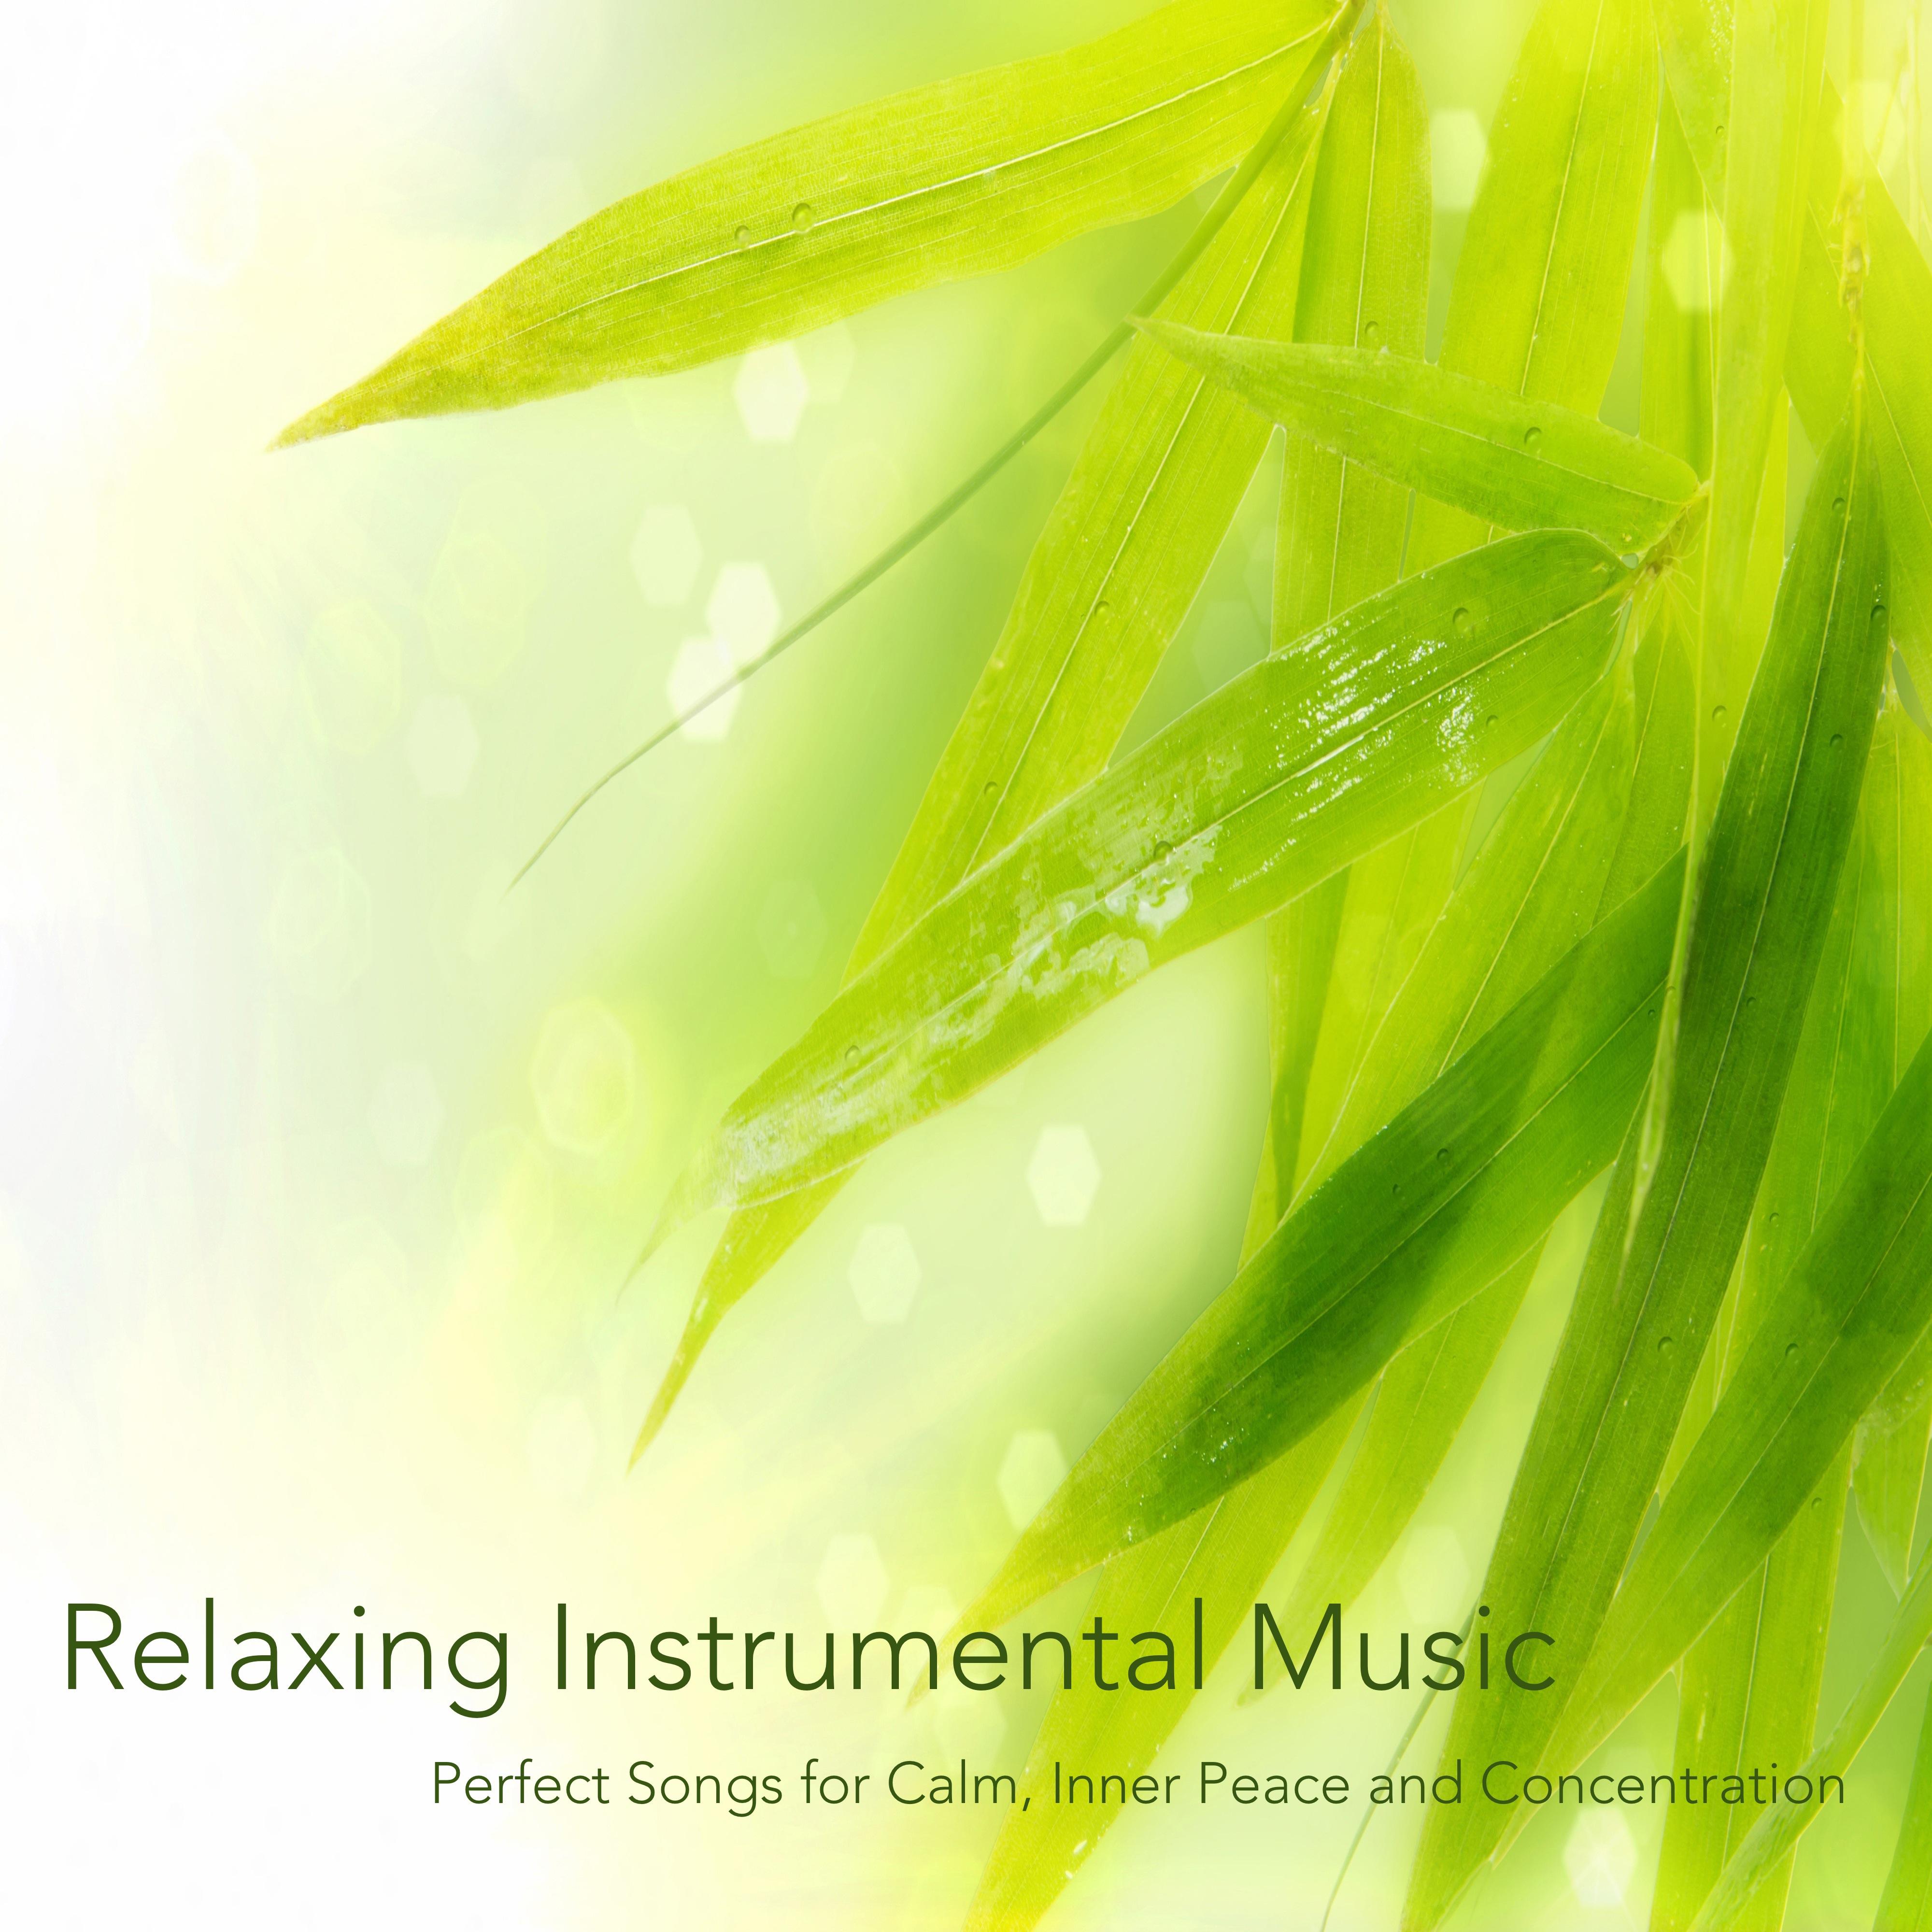 Relaxing Instrumental Music: Perfect Songs for Calm, Inner Peace and Concentration